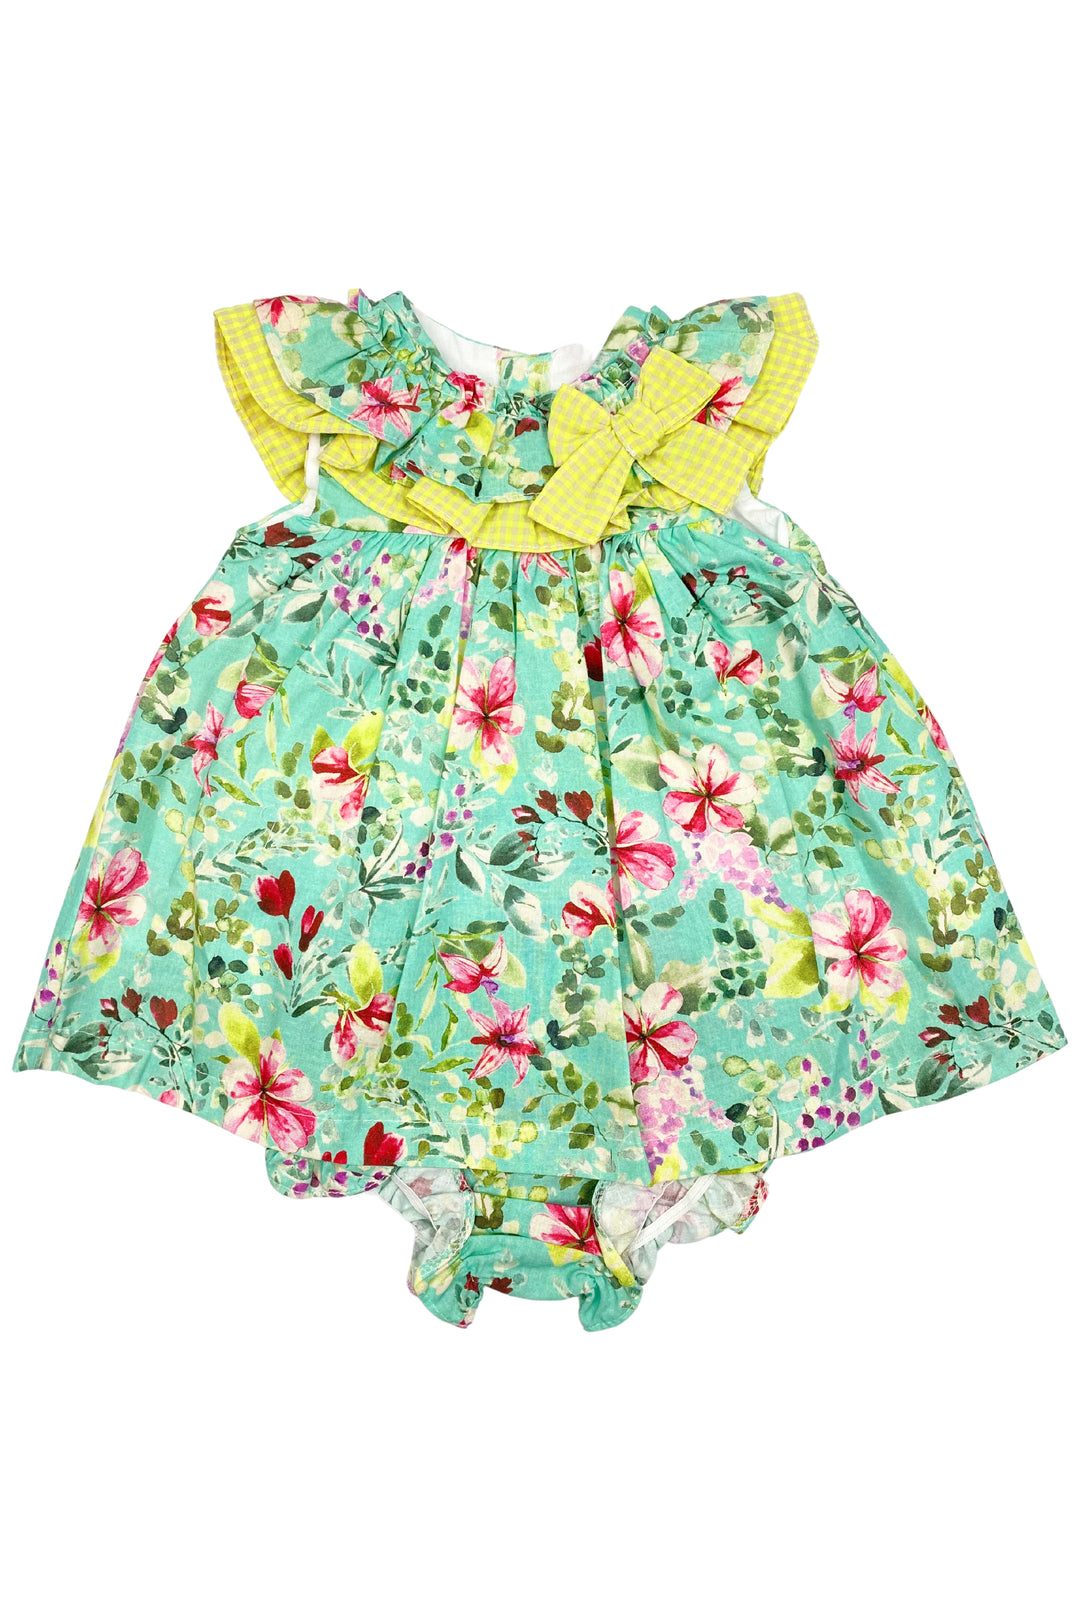 Valentina Bebes "Suki" Turquoise Floral Dress & Bloomers | Millie and John